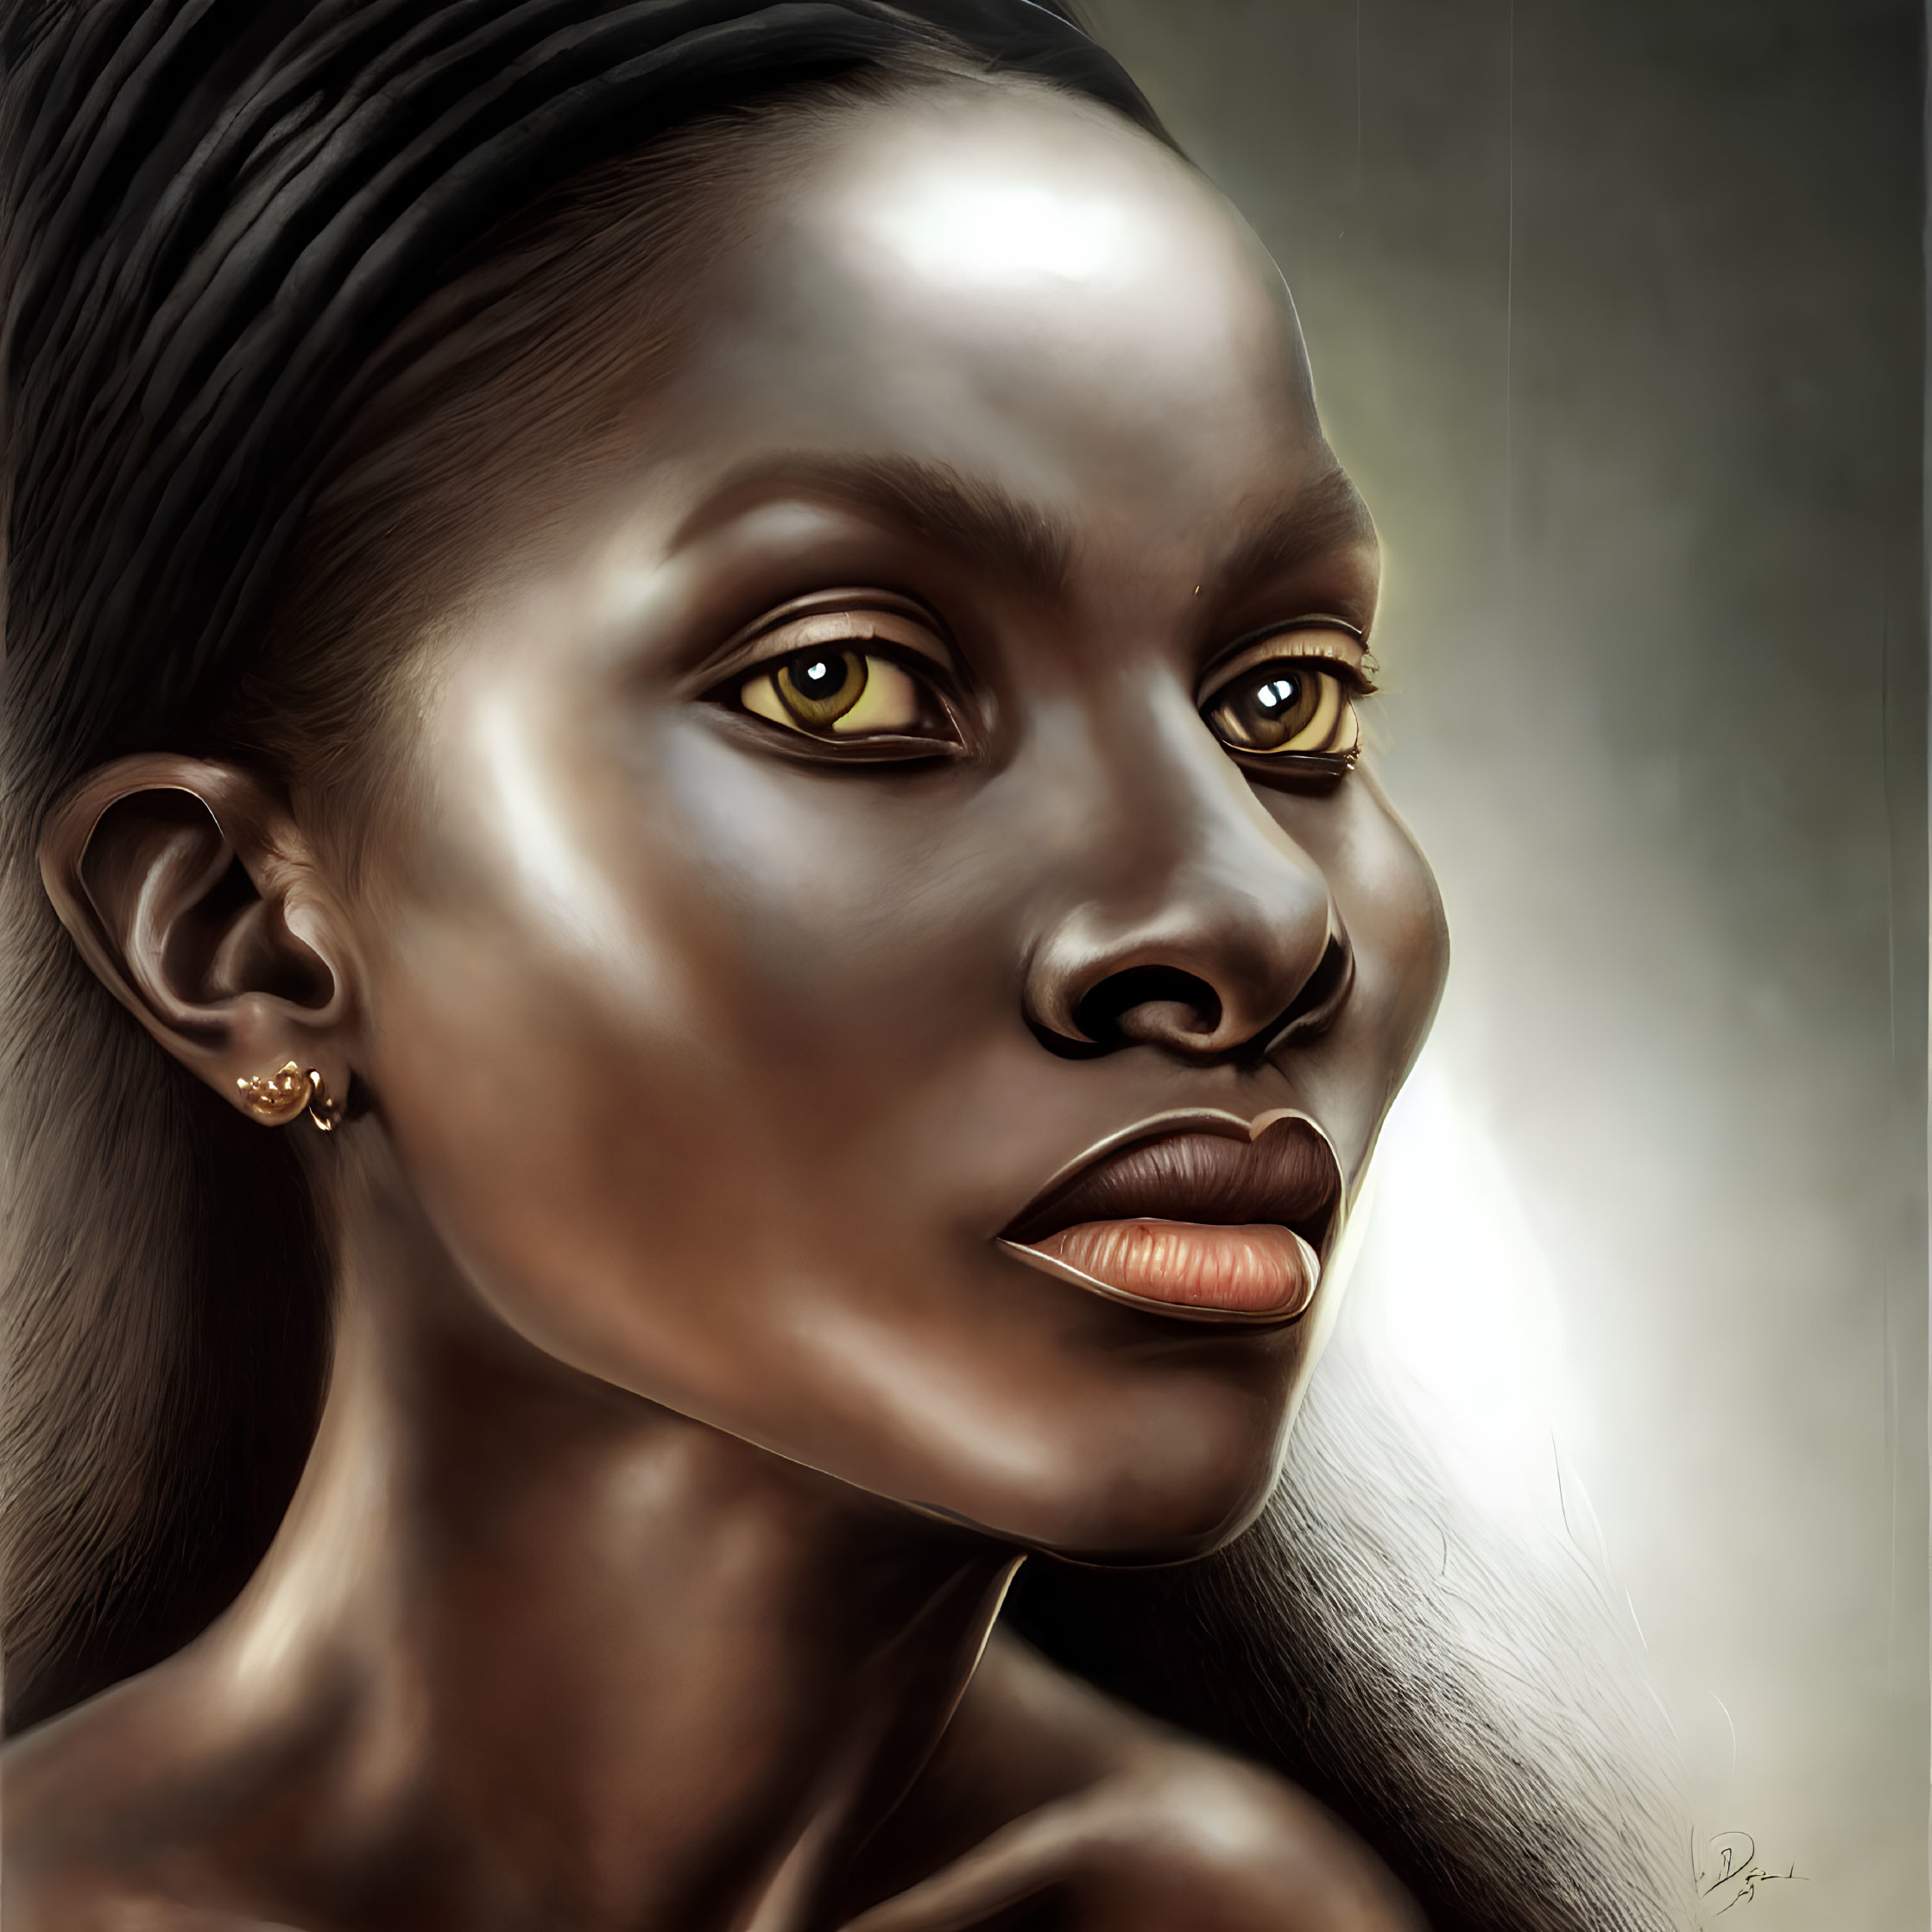 Digital portrait of woman with yellow eyes, contrasting skin tones, headband, and intense gaze